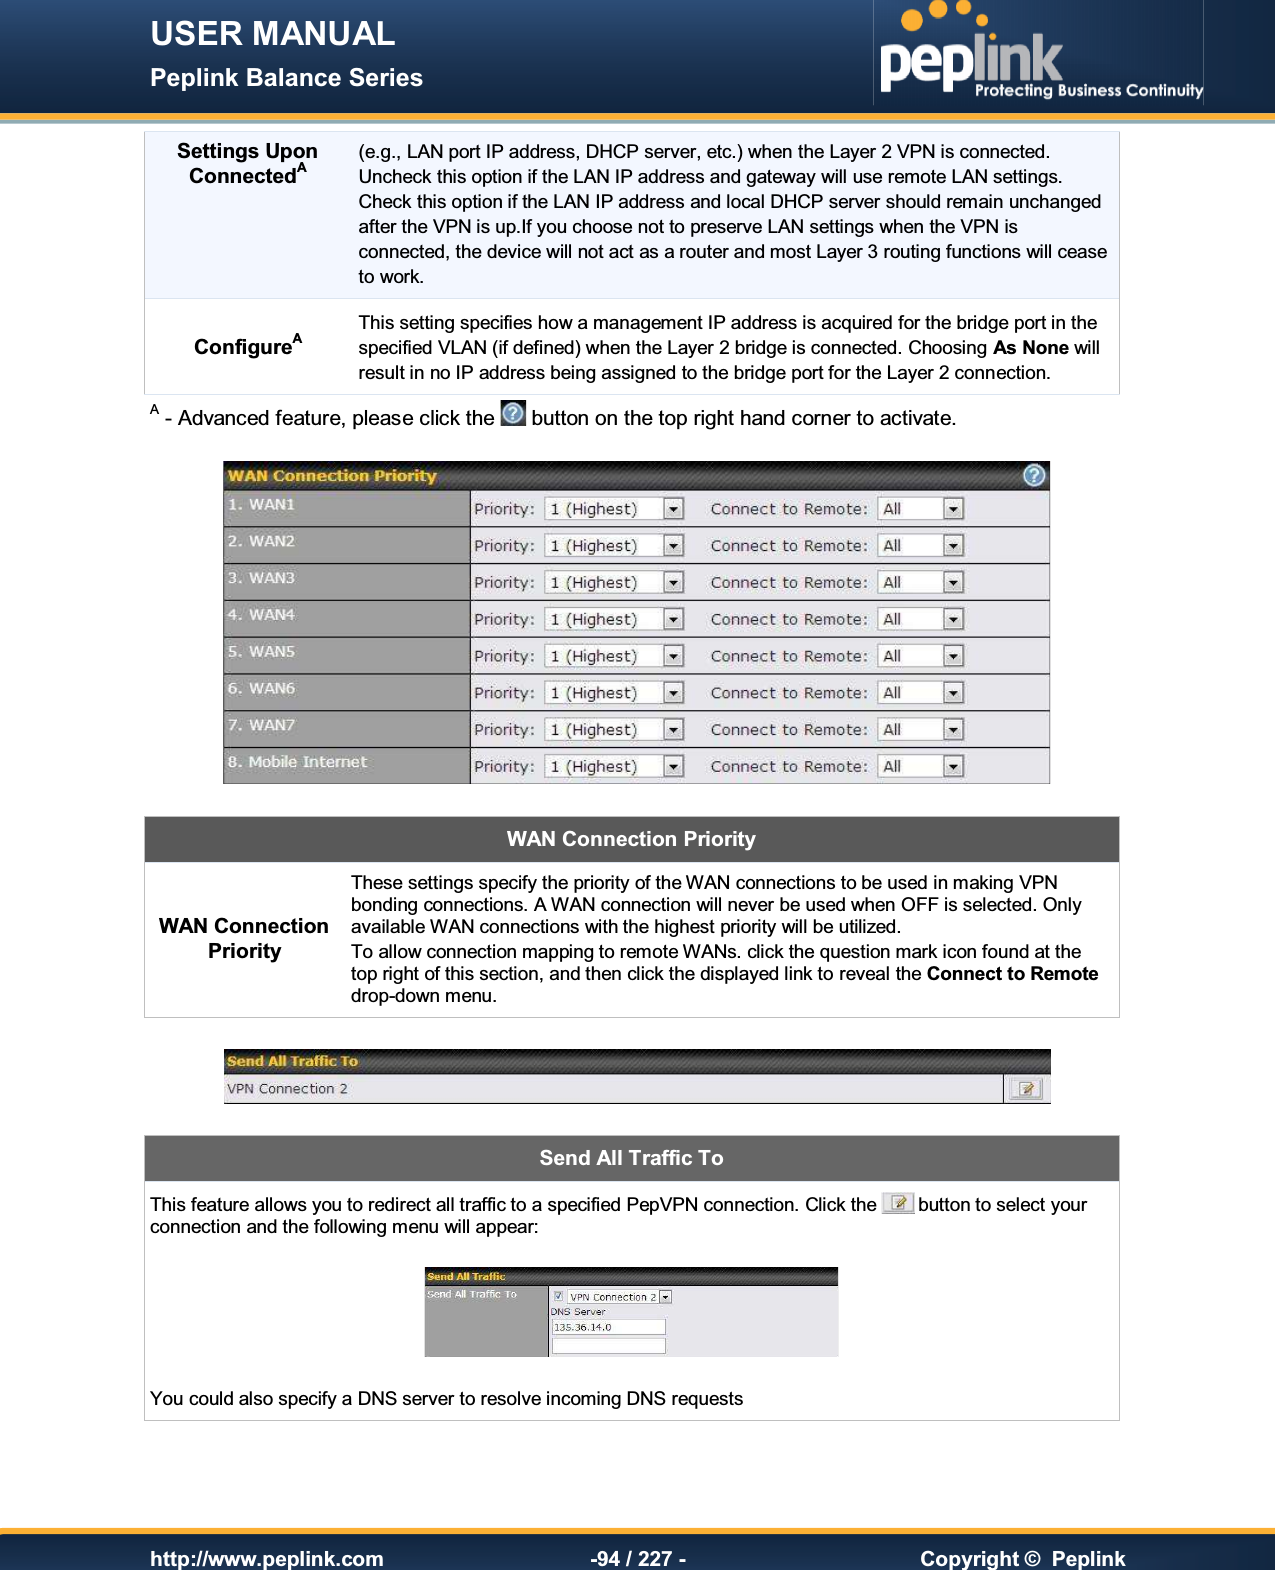 USER MANUAL Peplink Balance Series   http://www.peplink.com -94 / 227 -  Copyright ©  Peplink Settings Upon ConnectedA (e.g., LAN port IP address, DHCP server, etc.) when the Layer 2 VPN is connected. Uncheck this option if the LAN IP address and gateway will use remote LAN settings. Check this option if the LAN IP address and local DHCP server should remain unchanged after the VPN is up.If you choose not to preserve LAN settings when the VPN is connected, the device will not act as a router and most Layer 3 routing functions will cease to work. ConfigureA This setting specifies how a management IP address is acquired for the bridge port in the specified VLAN (if defined) when the Layer 2 bridge is connected. Choosing As None will result in no IP address being assigned to the bridge port for the Layer 2 connection. A - Advanced feature, please click the   button on the top right hand corner to activate.    WAN Connection Priority WAN Connection Priority These settings specify the priority of the WAN connections to be used in making VPN bonding connections. A WAN connection will never be used when OFF is selected. Only available WAN connections with the highest priority will be utilized. To allow connection mapping to remote WANs. click the question mark icon found at the top right of this section, and then click the displayed link to reveal the Connect to Remote drop-down menu.    Send All Traffic To This feature allows you to redirect all traffic to a specified PepVPN connection. Click the   button to select your connection and the following menu will appear:    You could also specify a DNS server to resolve incoming DNS requests  